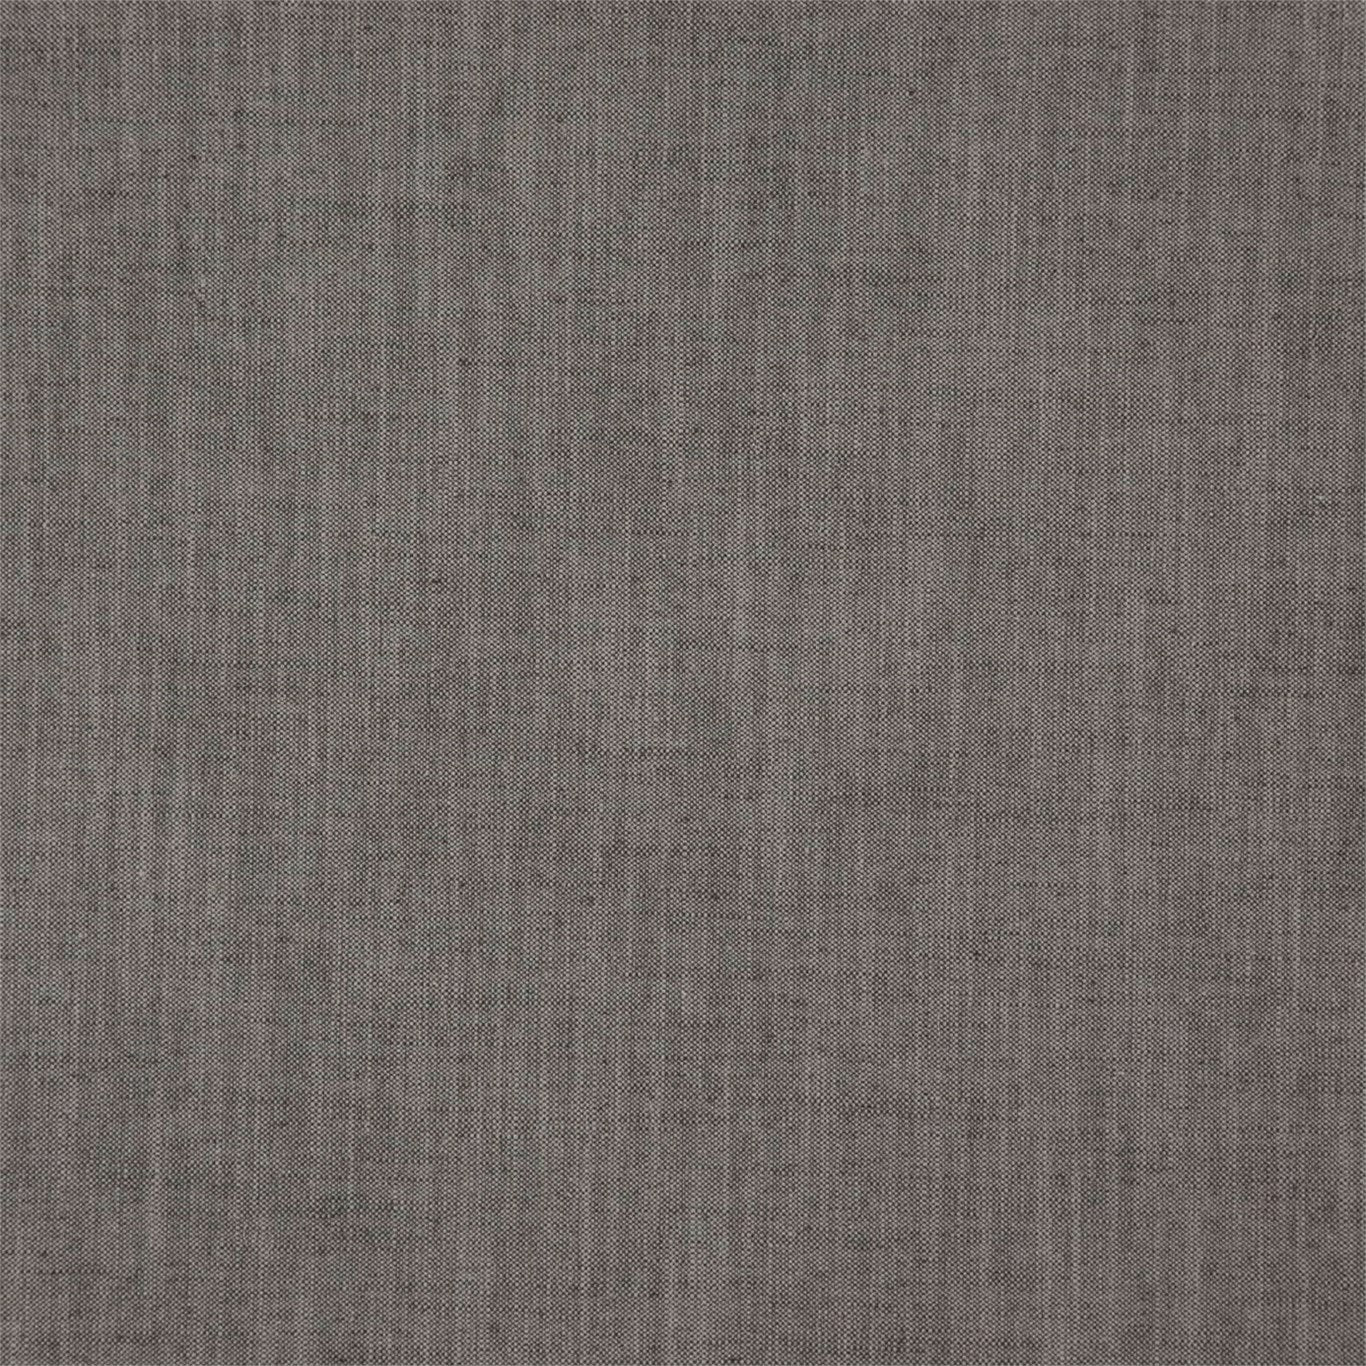 Chenies Fabric by Sanderson - DASH235639 - Taupe